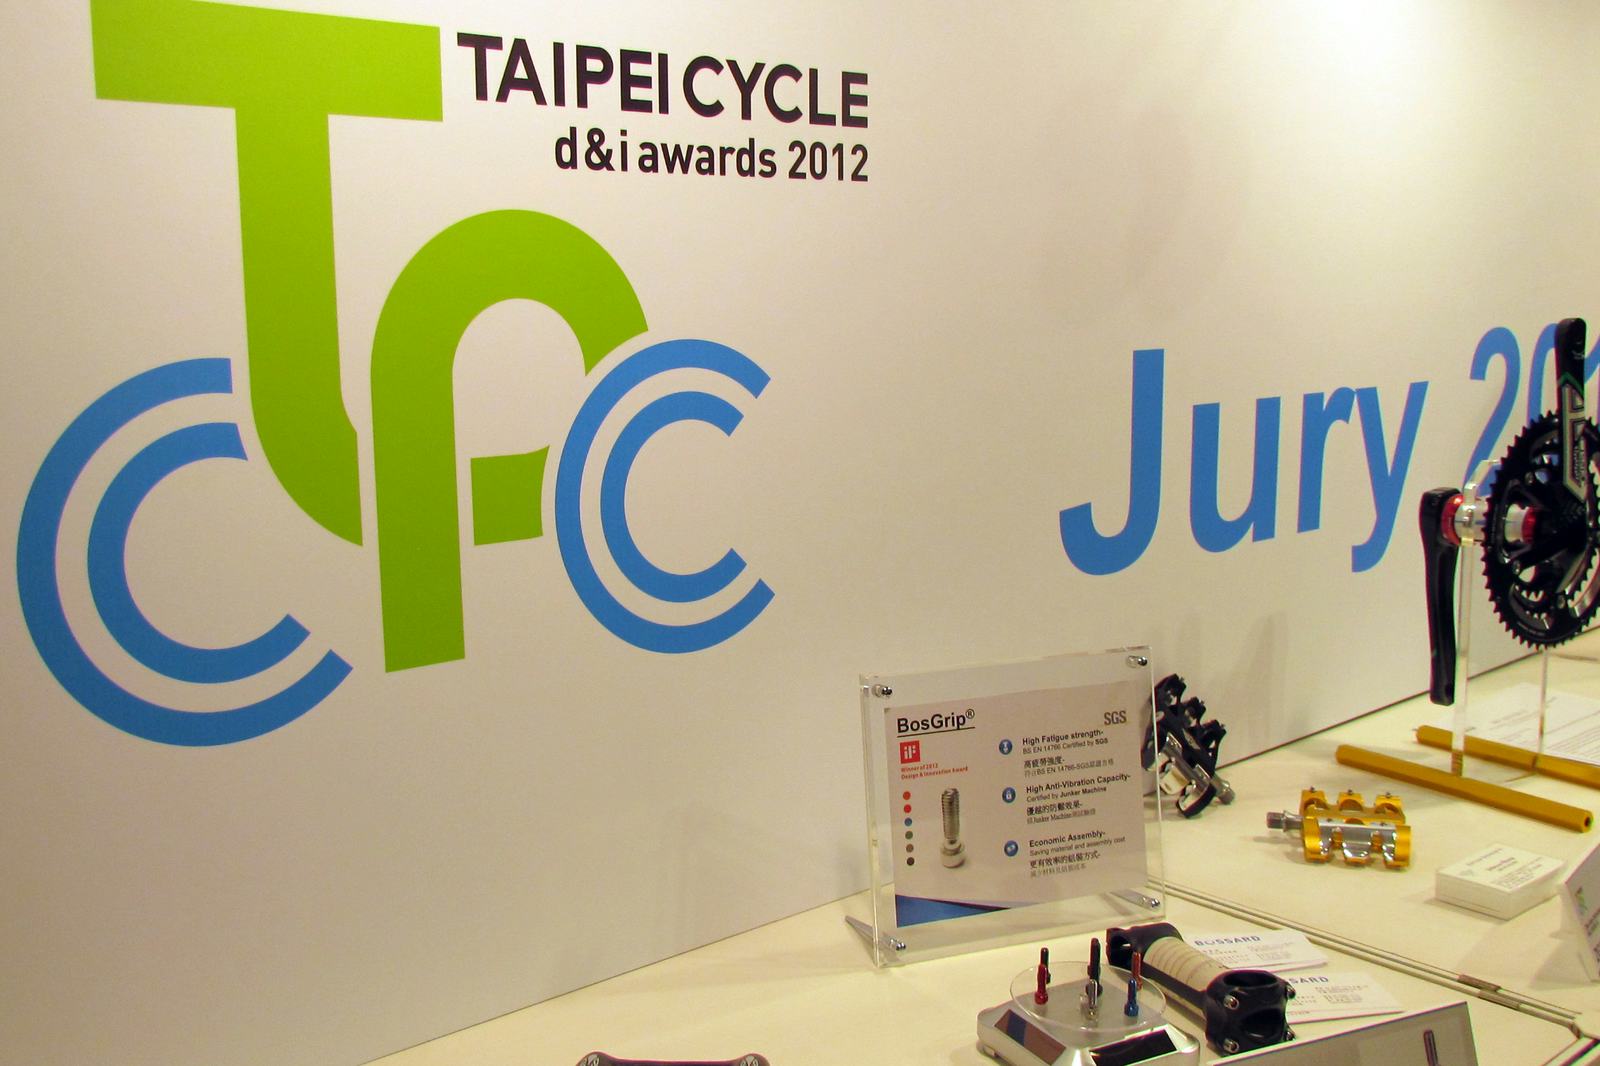 Taipei Cycle d&i Gold Award winners will be announced at the award ceremony on the eve of the Taipei Cycle Show.